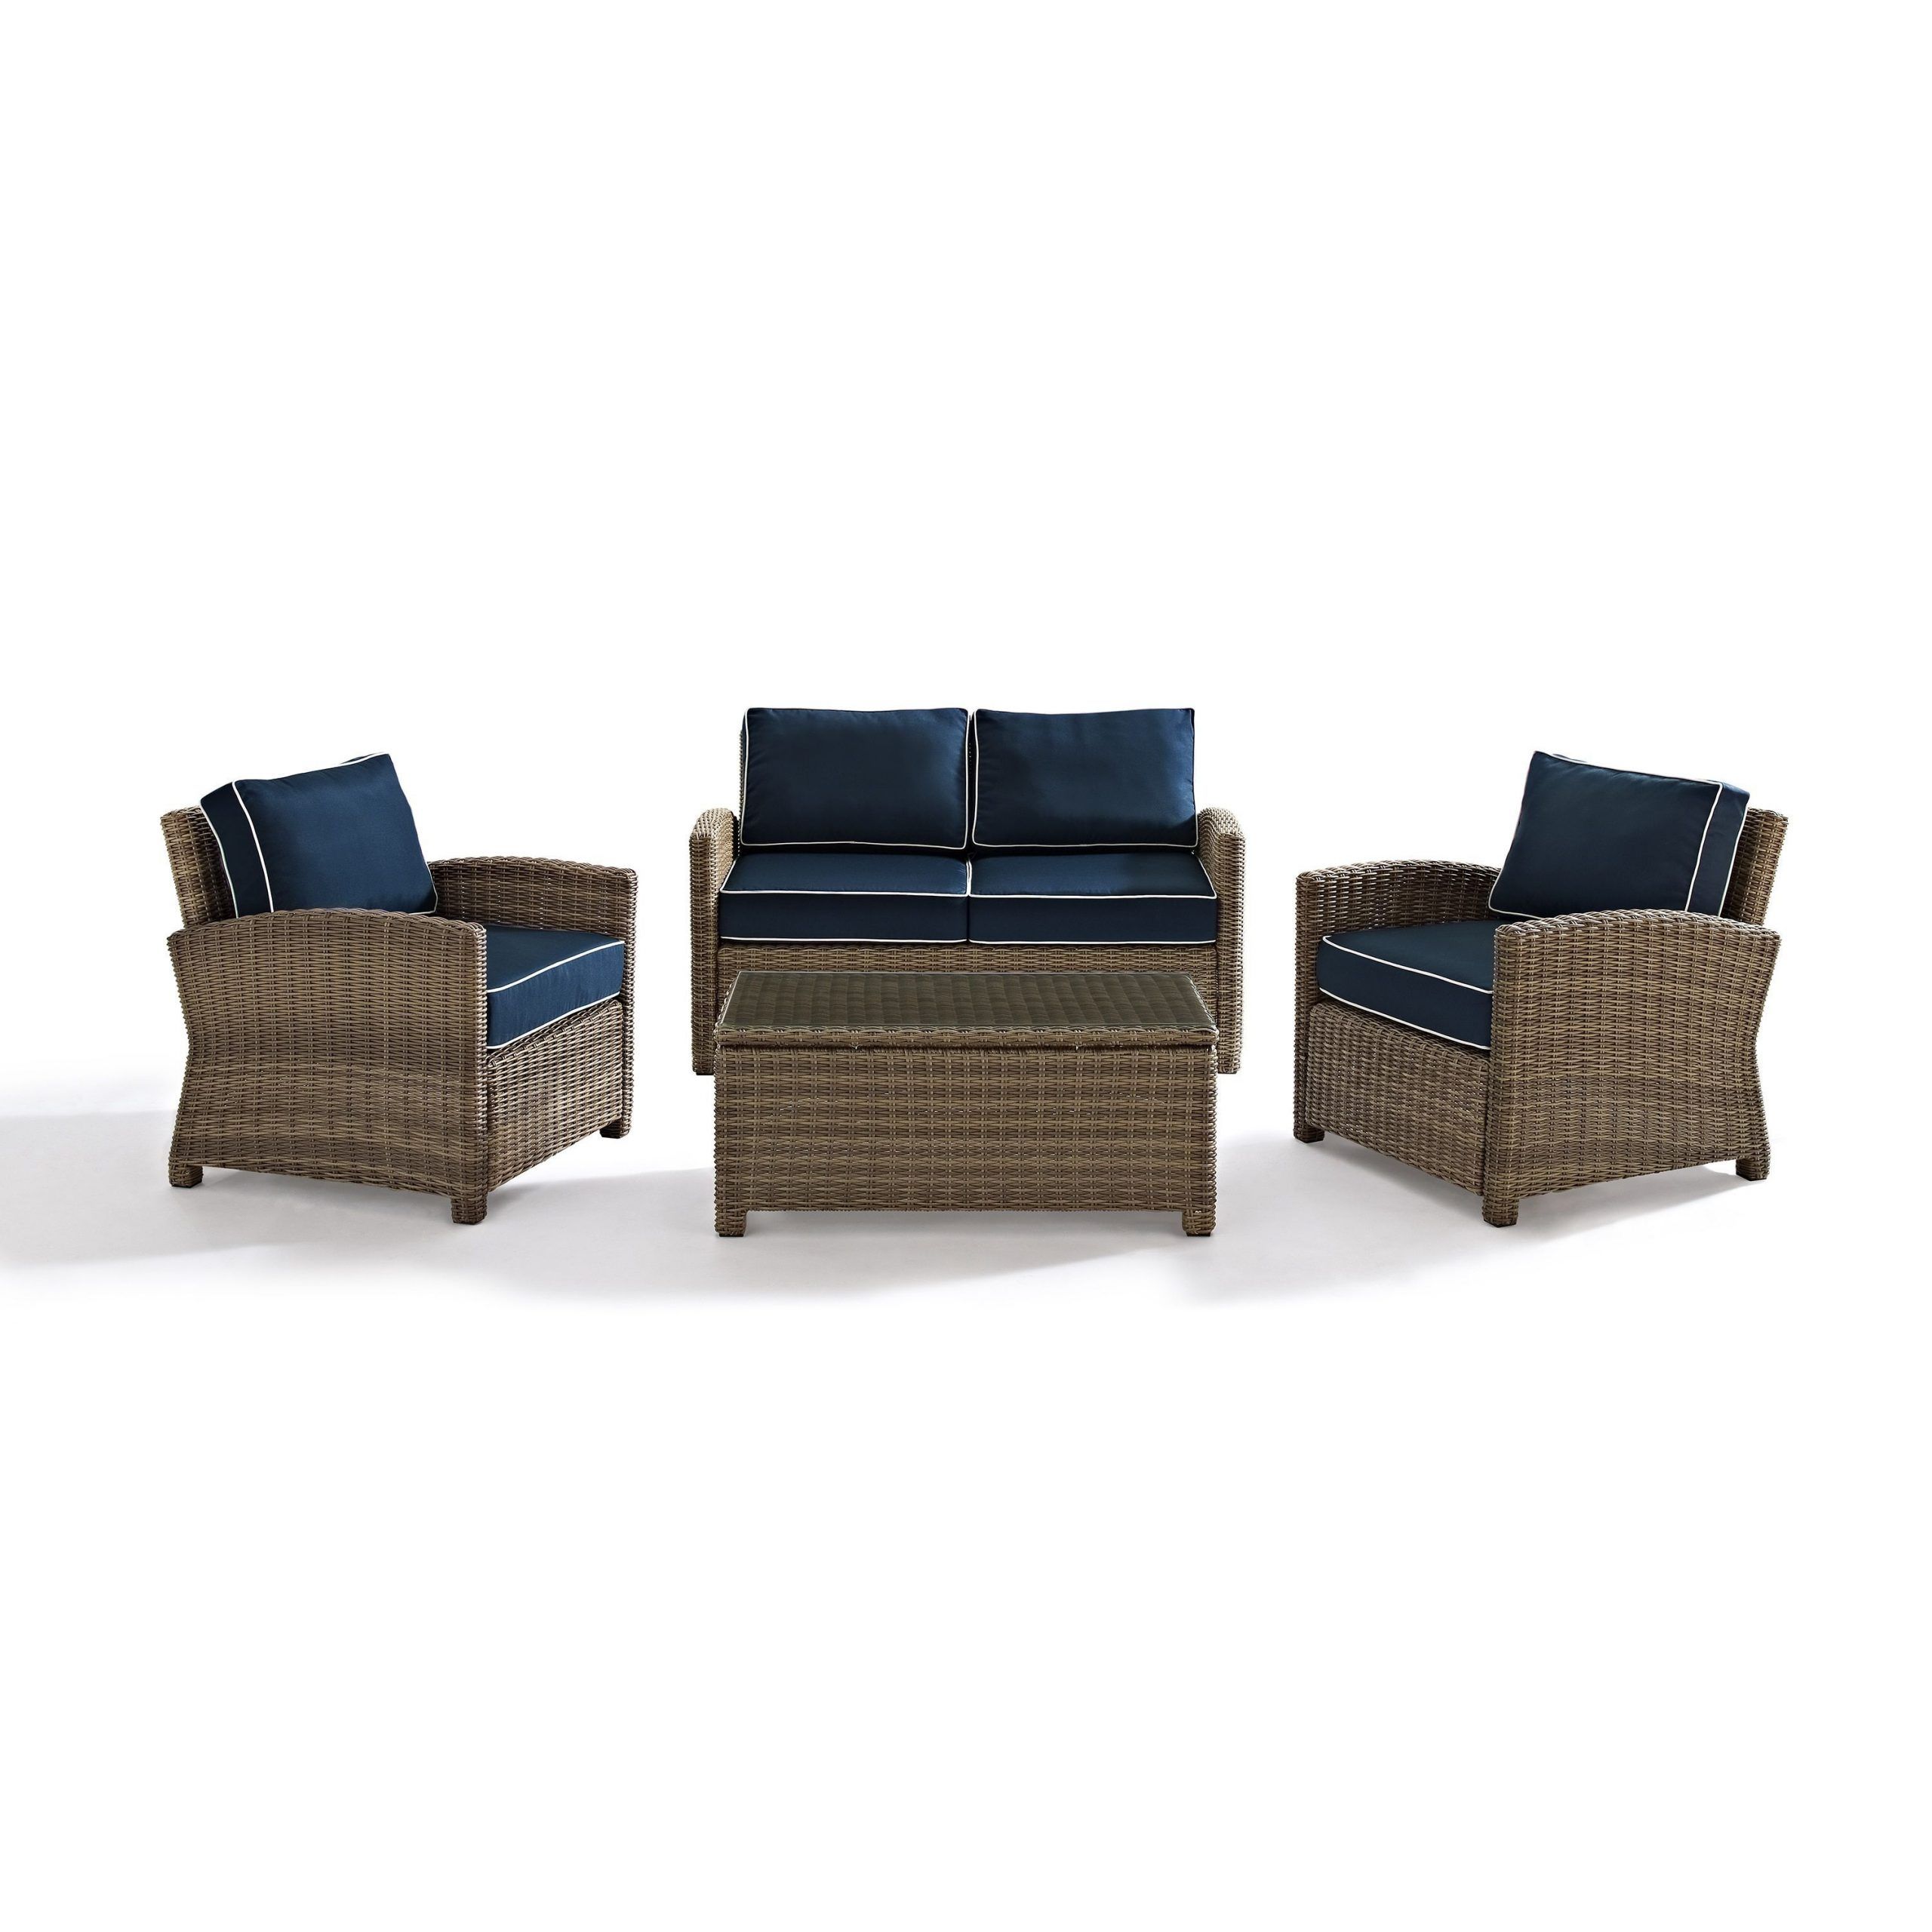 Widely Used Bradenton Outdoor Wicker 4 Piece Seating Set With Navy Cushions (brown In Navy Outdoor Seating Sectional Patio Sets (View 12 of 15)